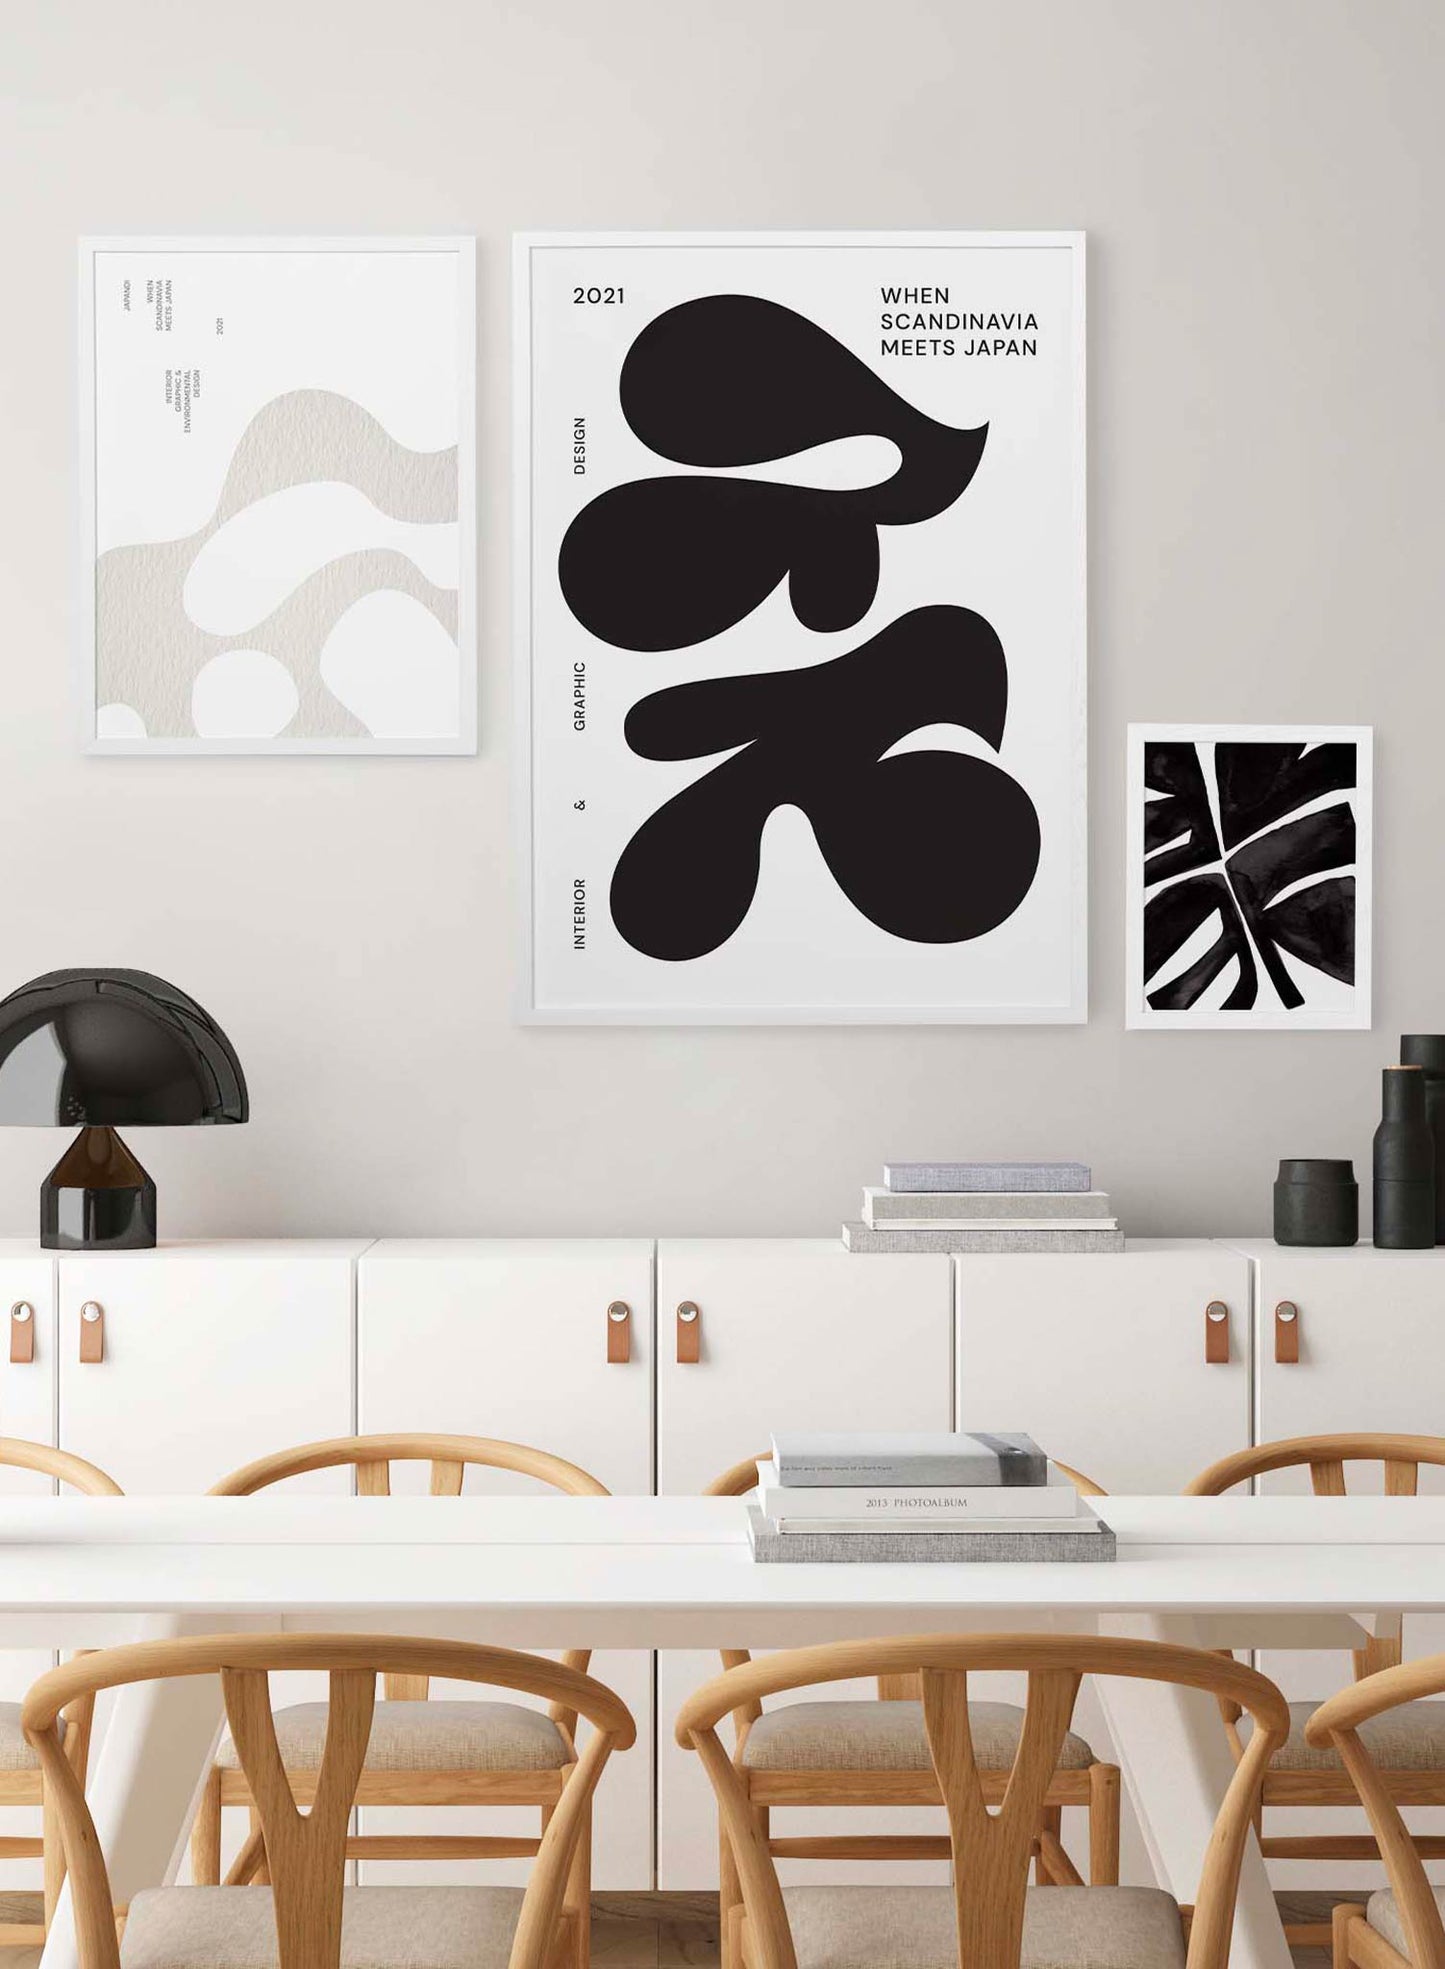 Scandinavia & Japan is a minimalist typography by Opposite Wall of the definition of a Japandi design which refers to a fusion of Japanese and Scandinavian home decor.